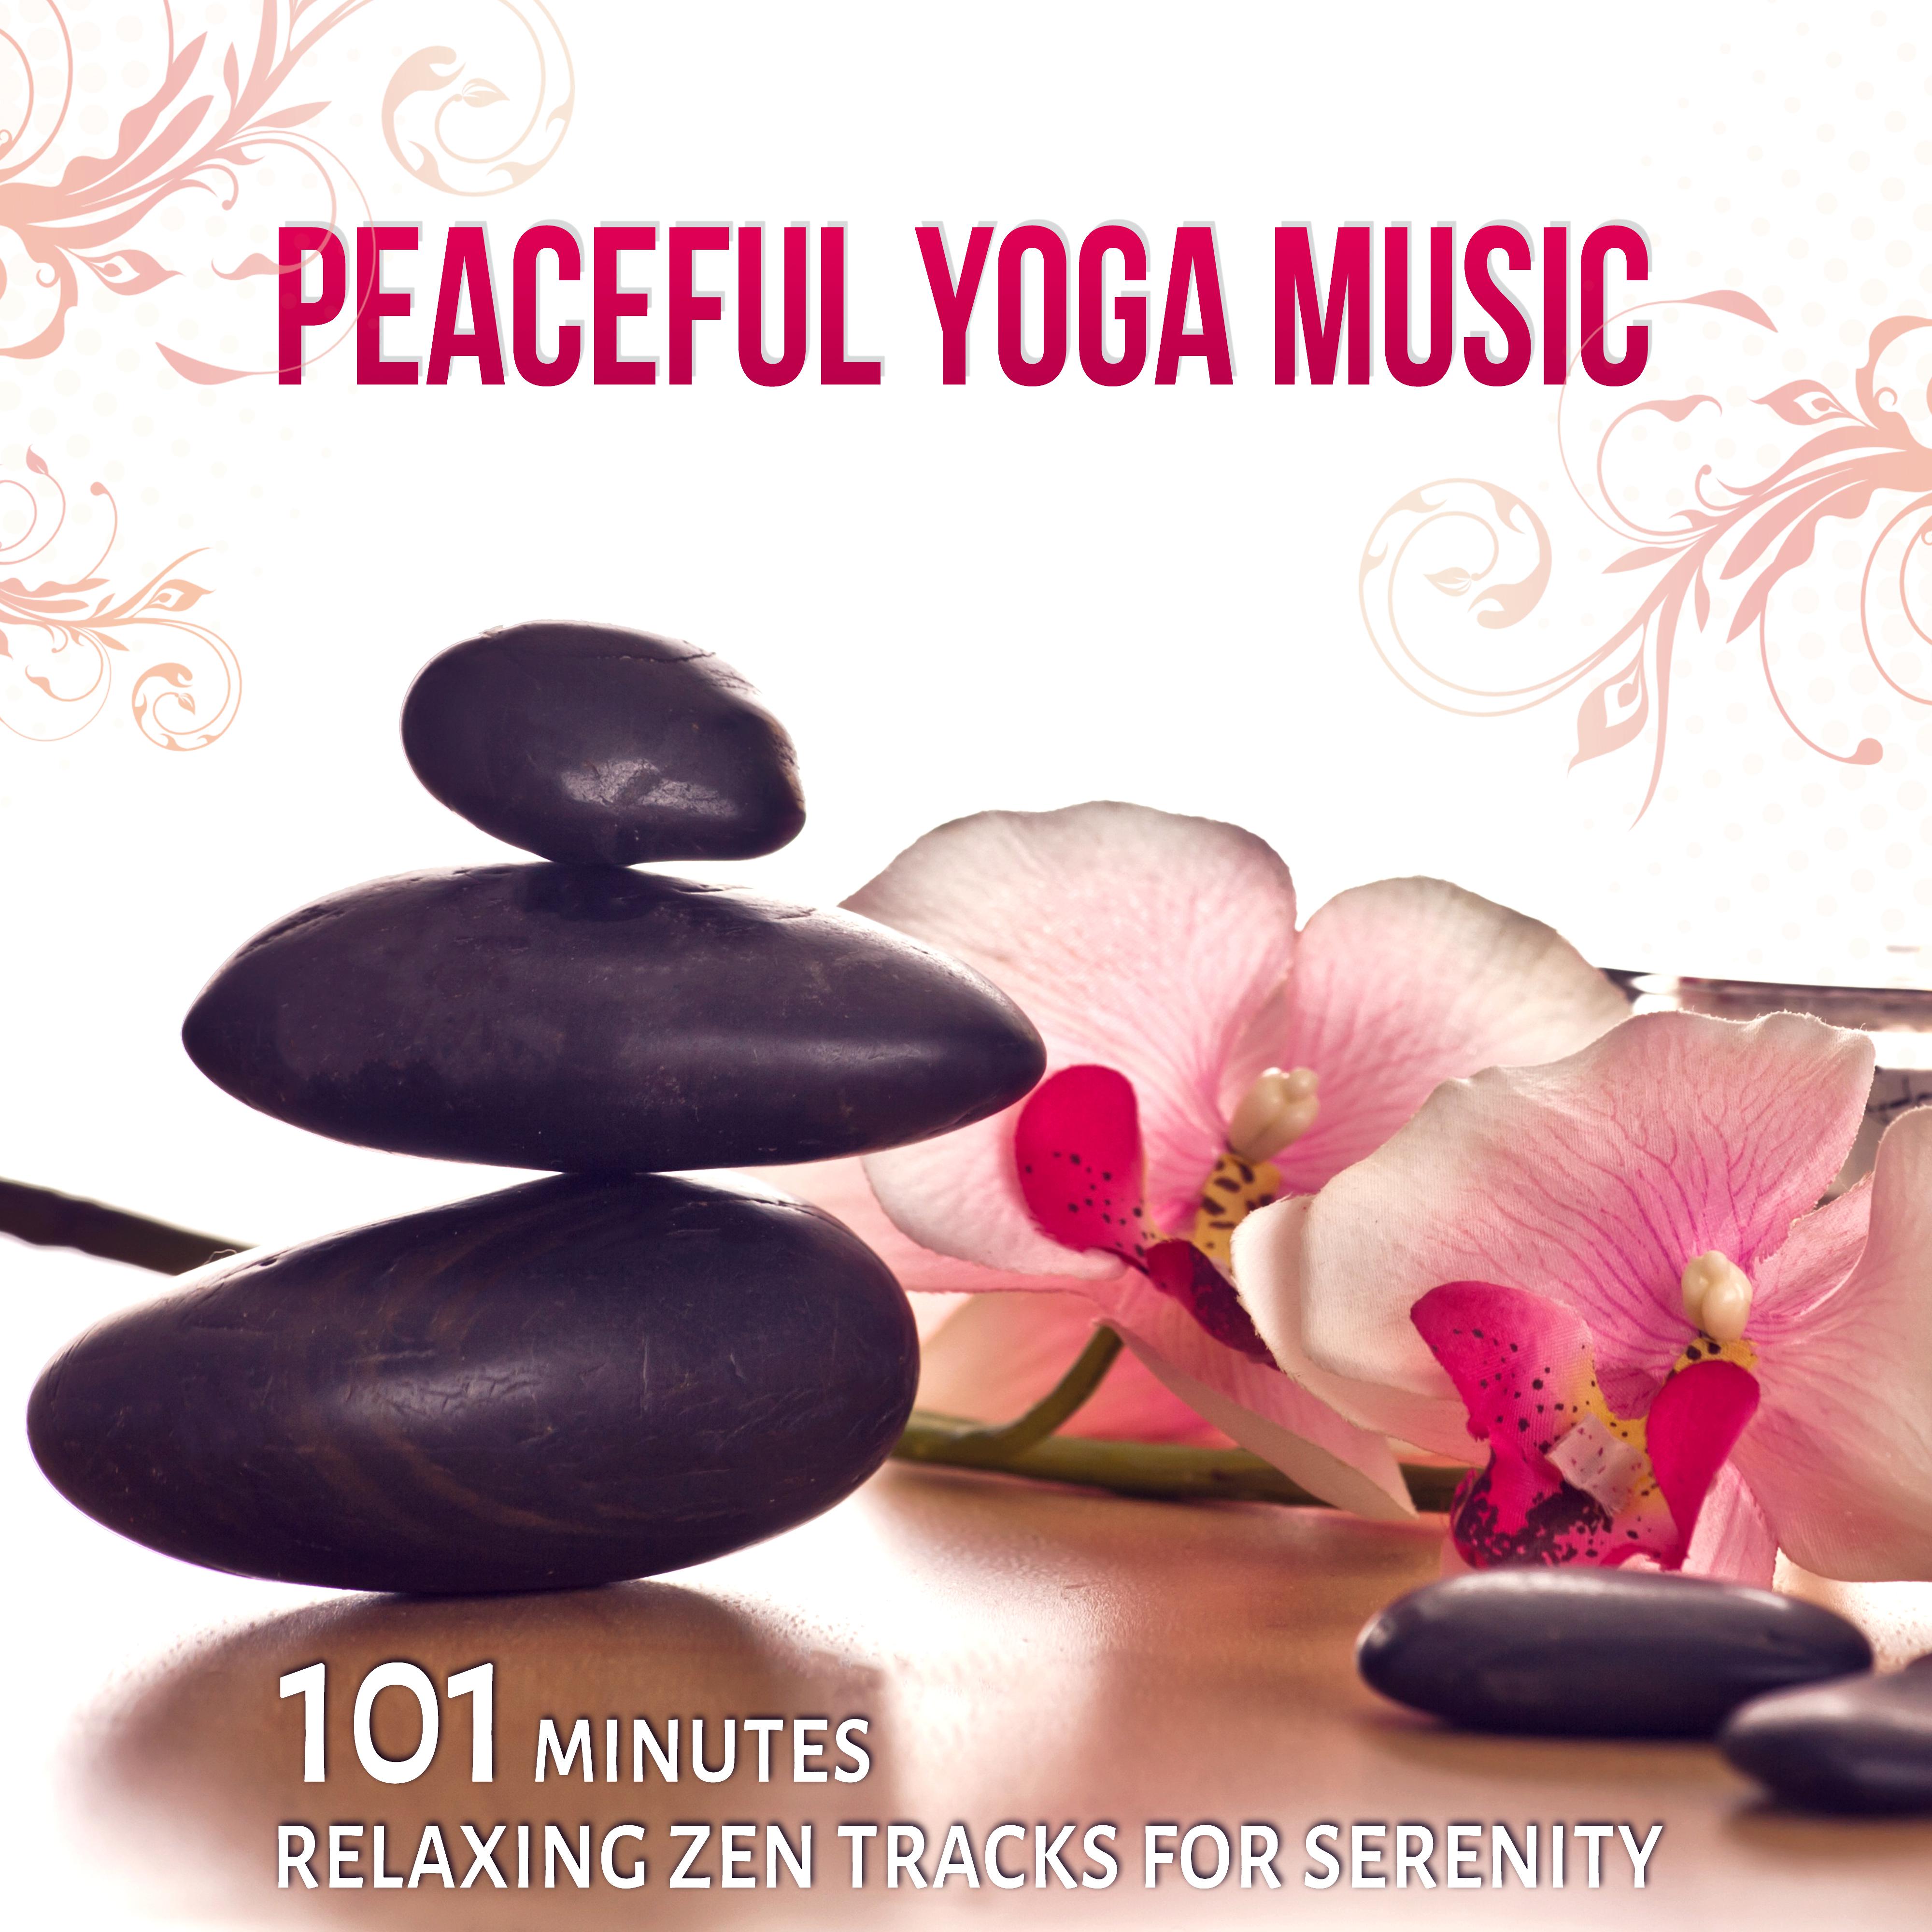 Peaceful Yoga Music: 101 Minutes Relaxing Zen Tracks for Serenity and Asian Meditation Music